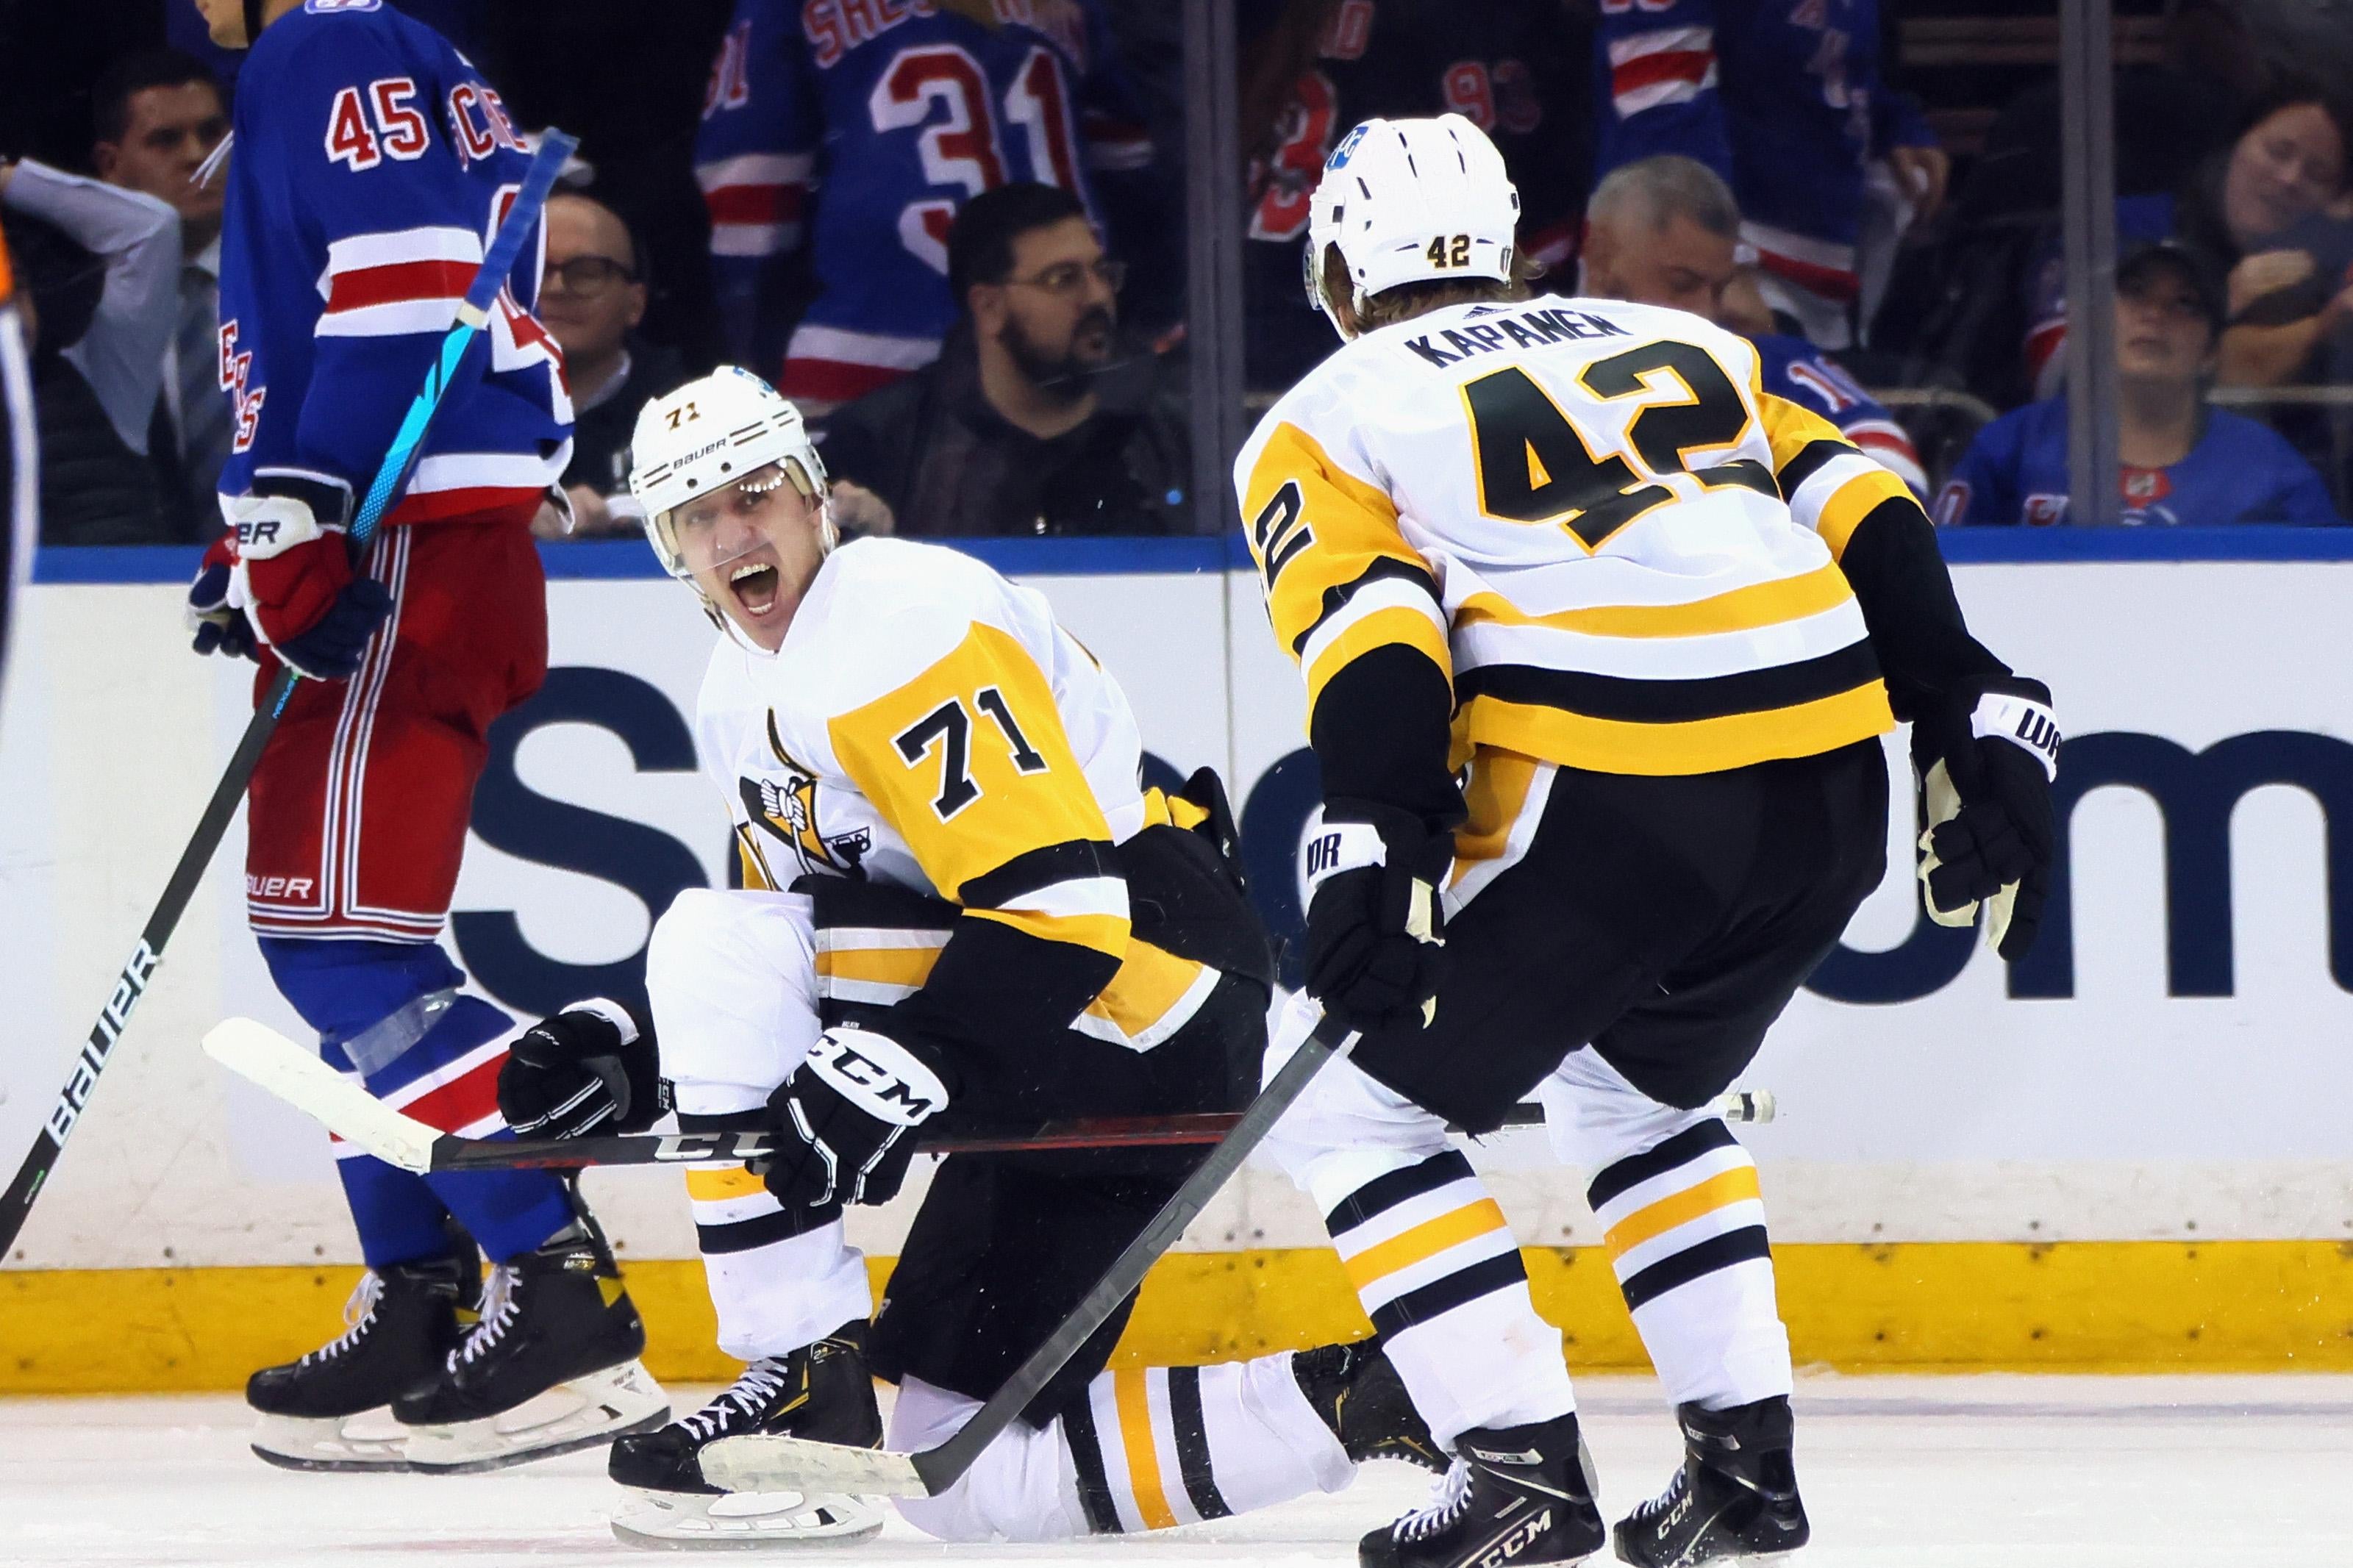 Malkin crouches and screams in celebration on the ice, looking at his teammate Kasperi Kapanen whose back is turned, as a New York Ranger skates dejectedly in the background